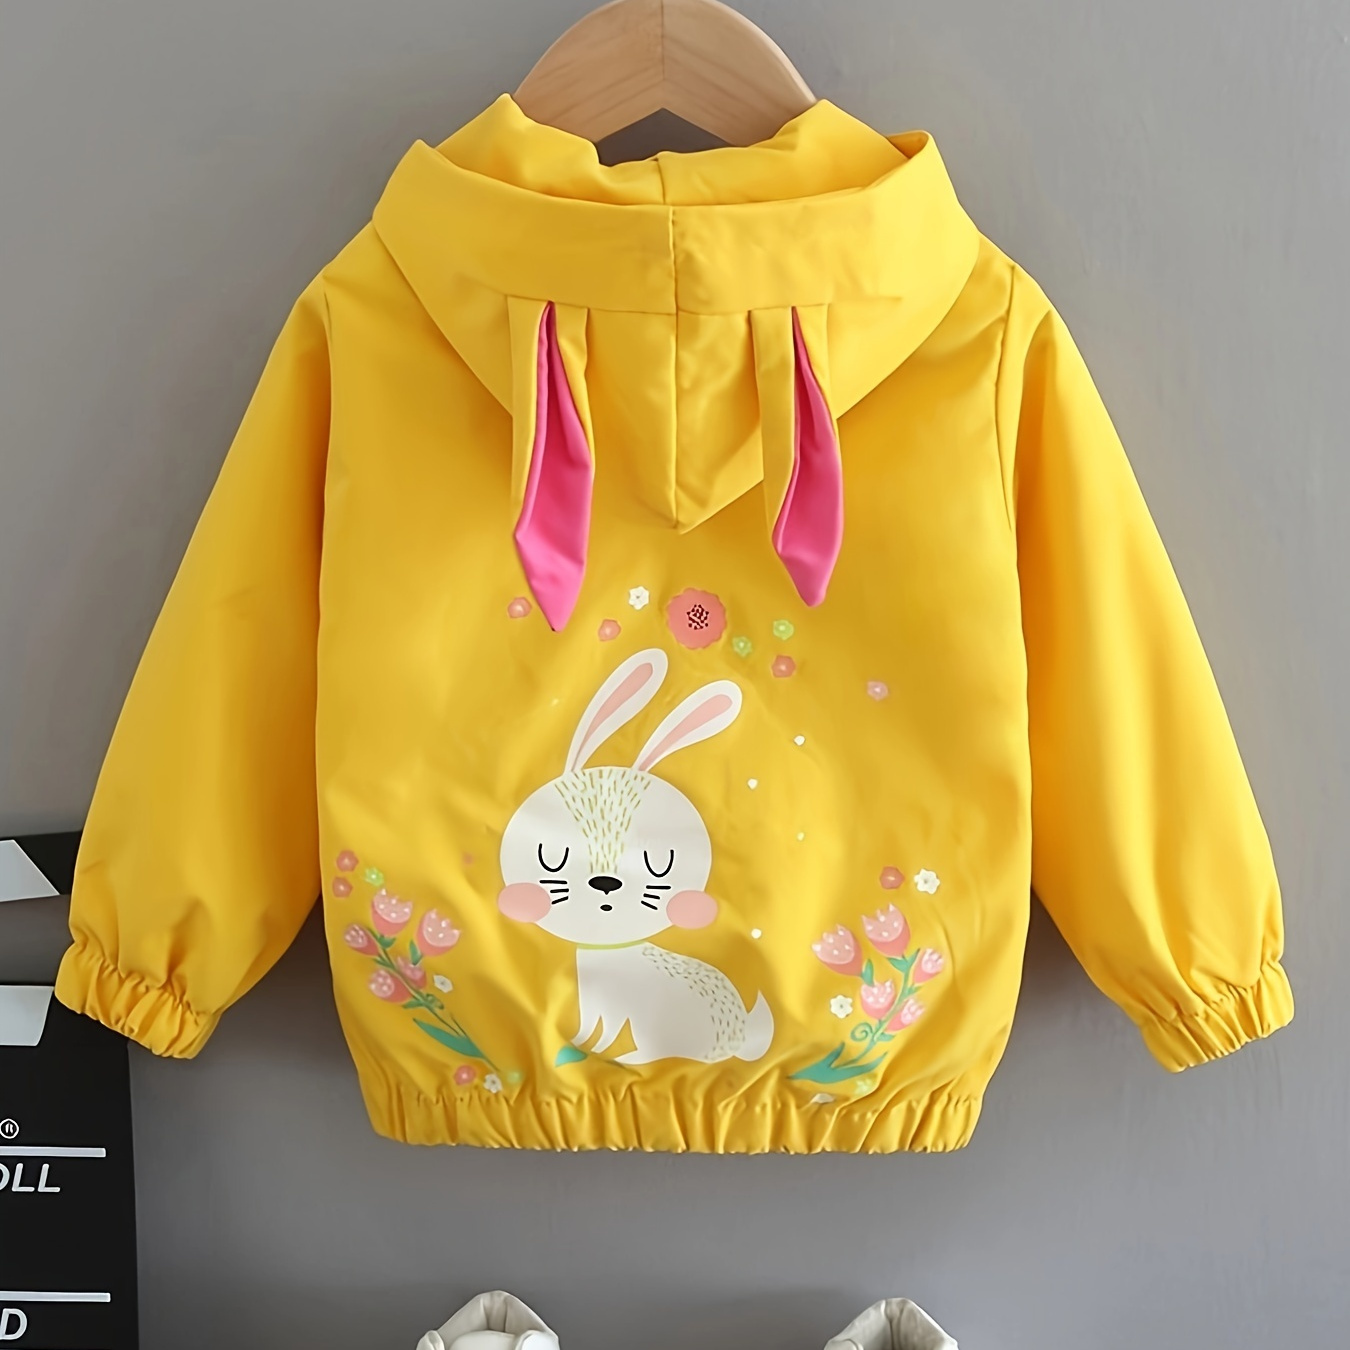 

Girls' Spring/autumn Light Jacket, Thin Coat With Lining, With A Cute Cartoon Print And A Stylish Hooded Design